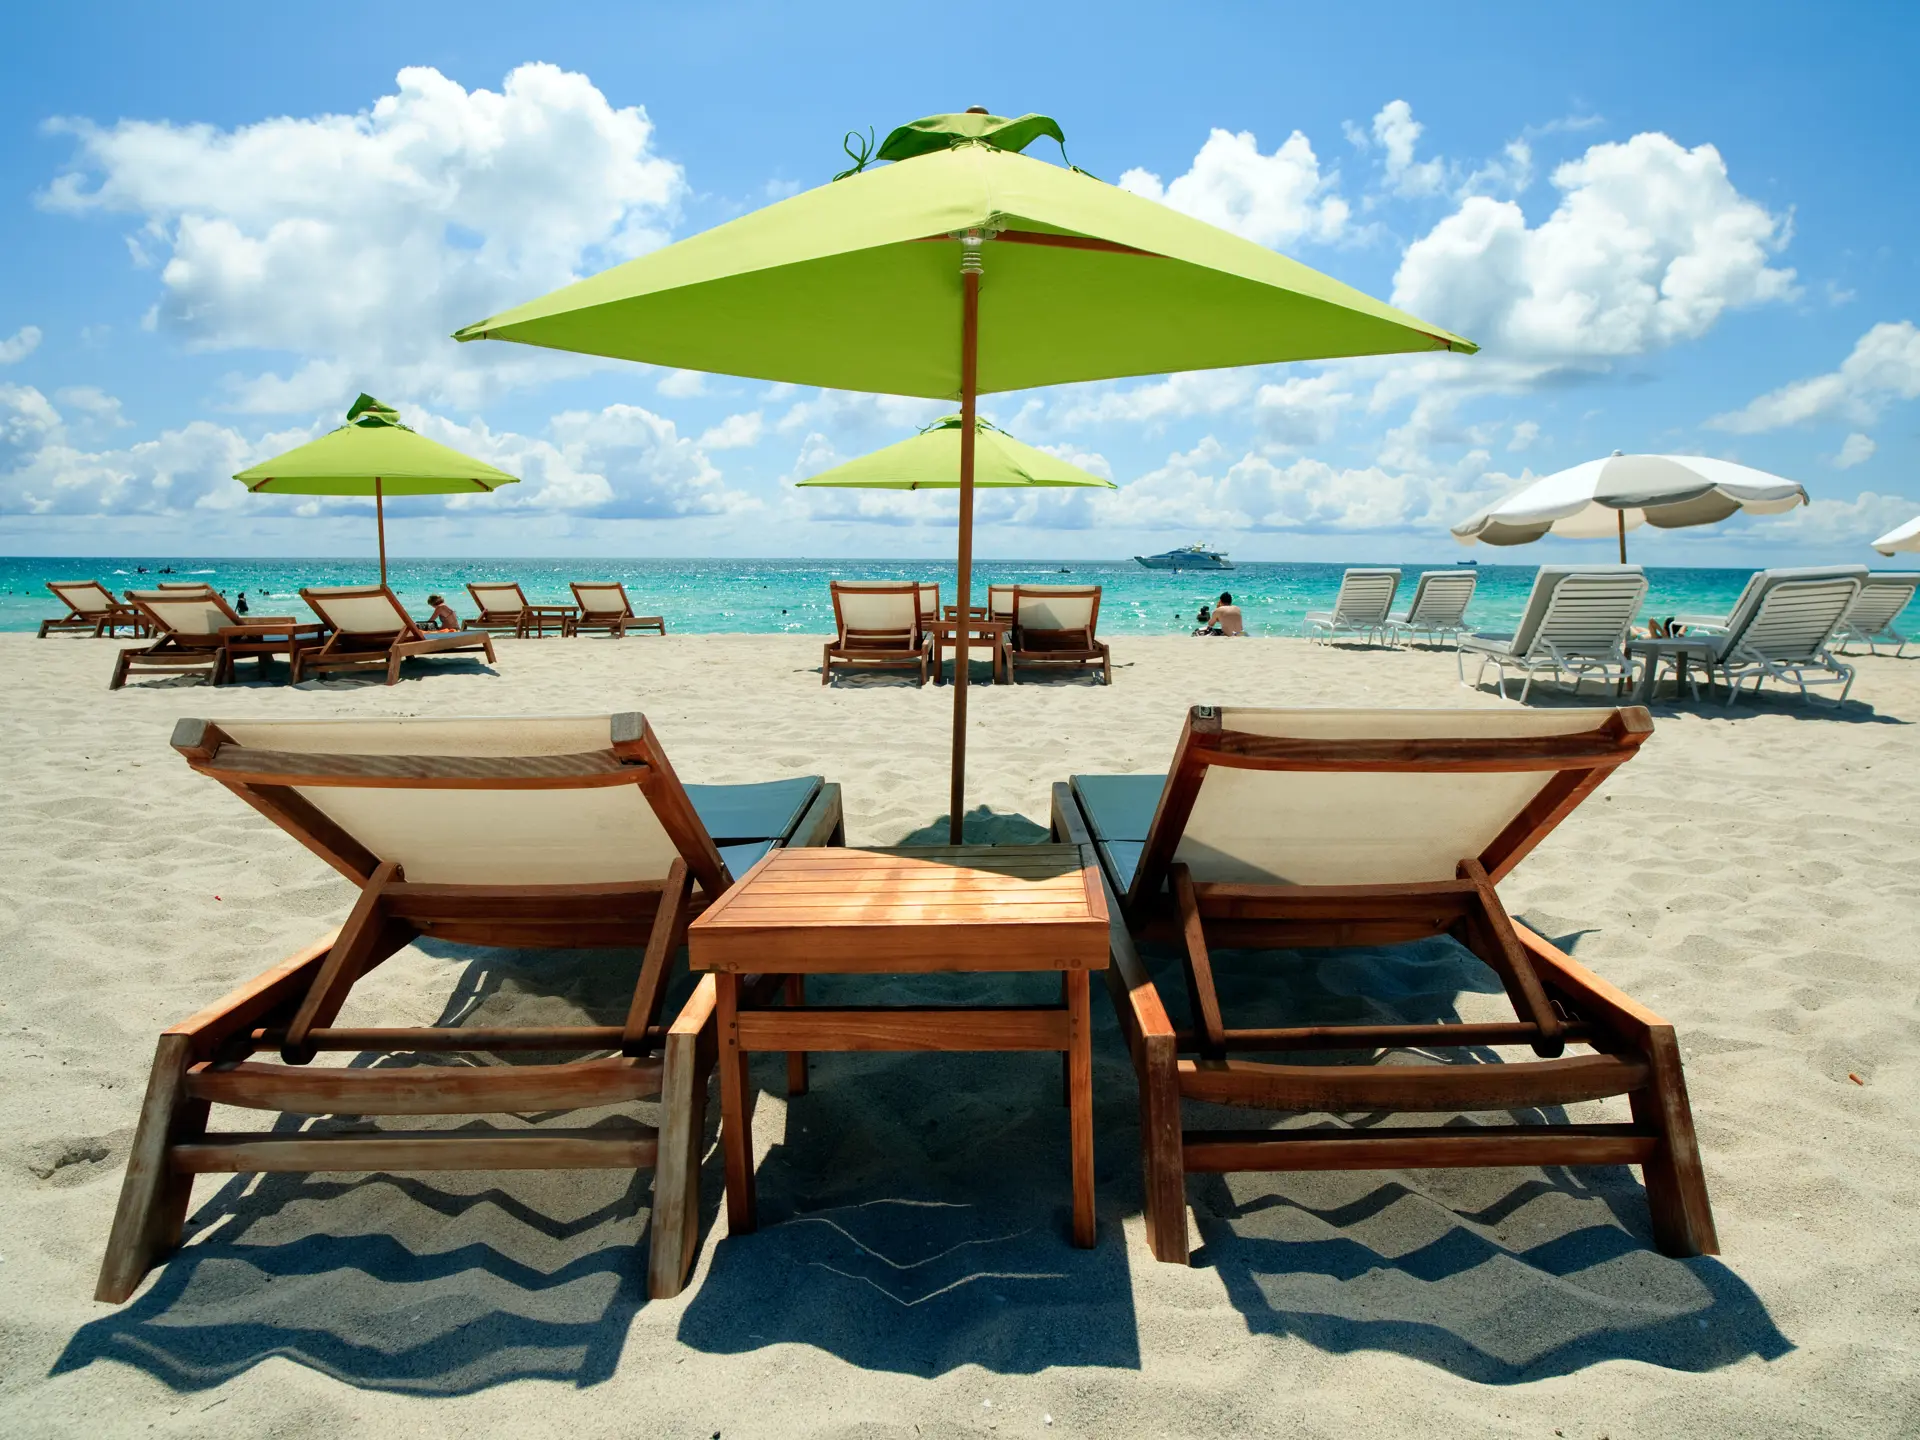 shutterstock_53590102 South Beach Lounge Chairs and Umbrellas.jpg